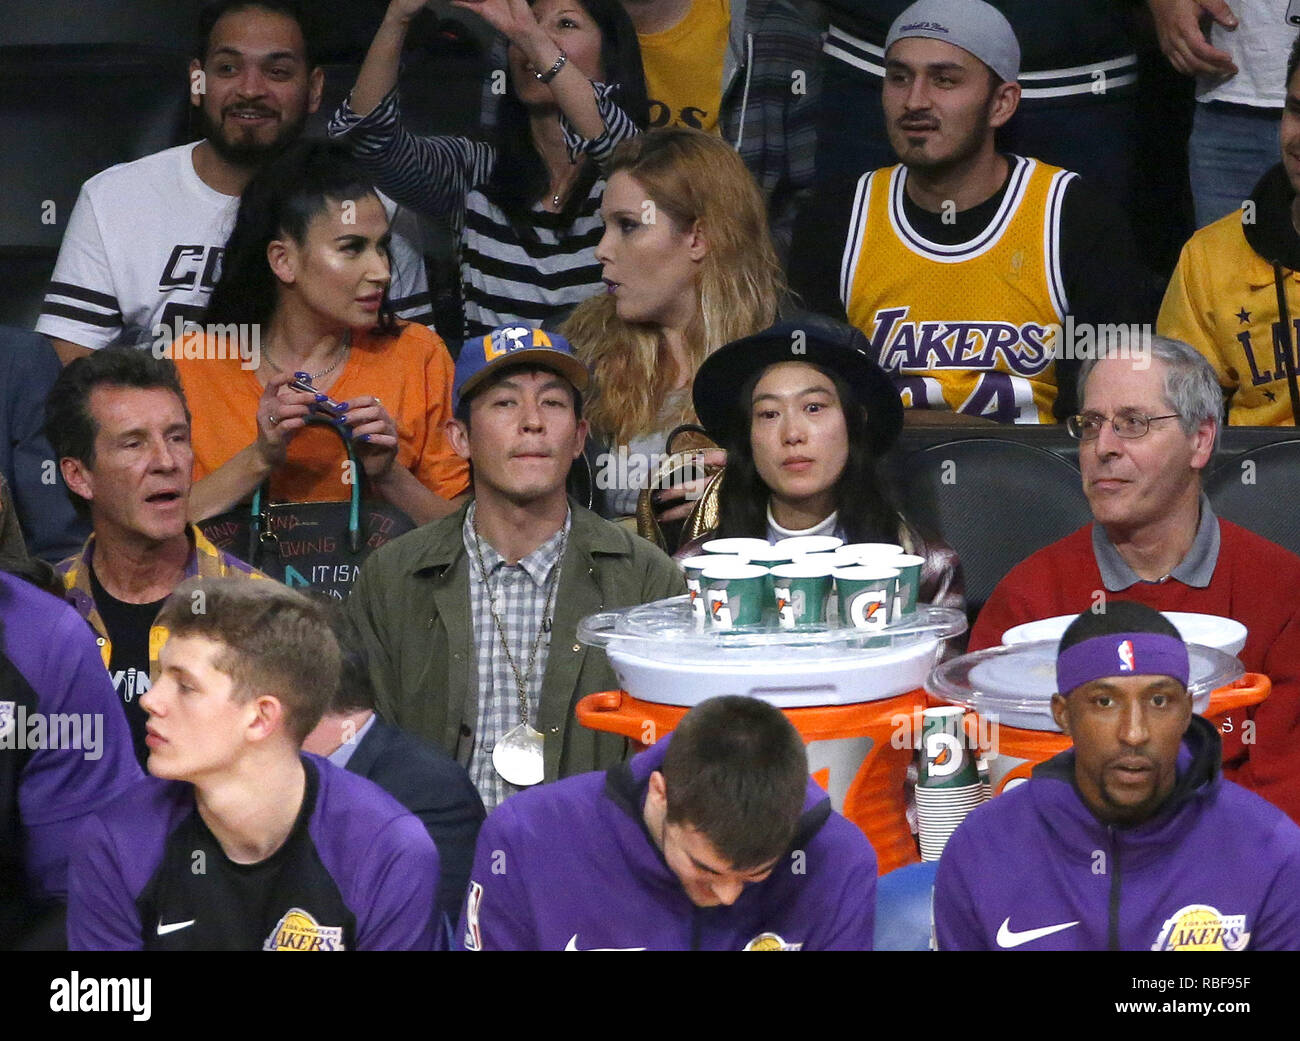 Los Angeles, California, USA. 9th Jan, 2019. Hong Kong-Canadian actor Edison Chen, as know as Edison Koon-hei Chen, Chen Guanxi, watches attends an NBA basketball game between Los Angeles Lakers and Detroit Pistons Wednesday, Jan. 9, 2019, in Los Angeles. Credit: Ringo Chiu/ZUMA Wire/Alamy Live News Stock Photo